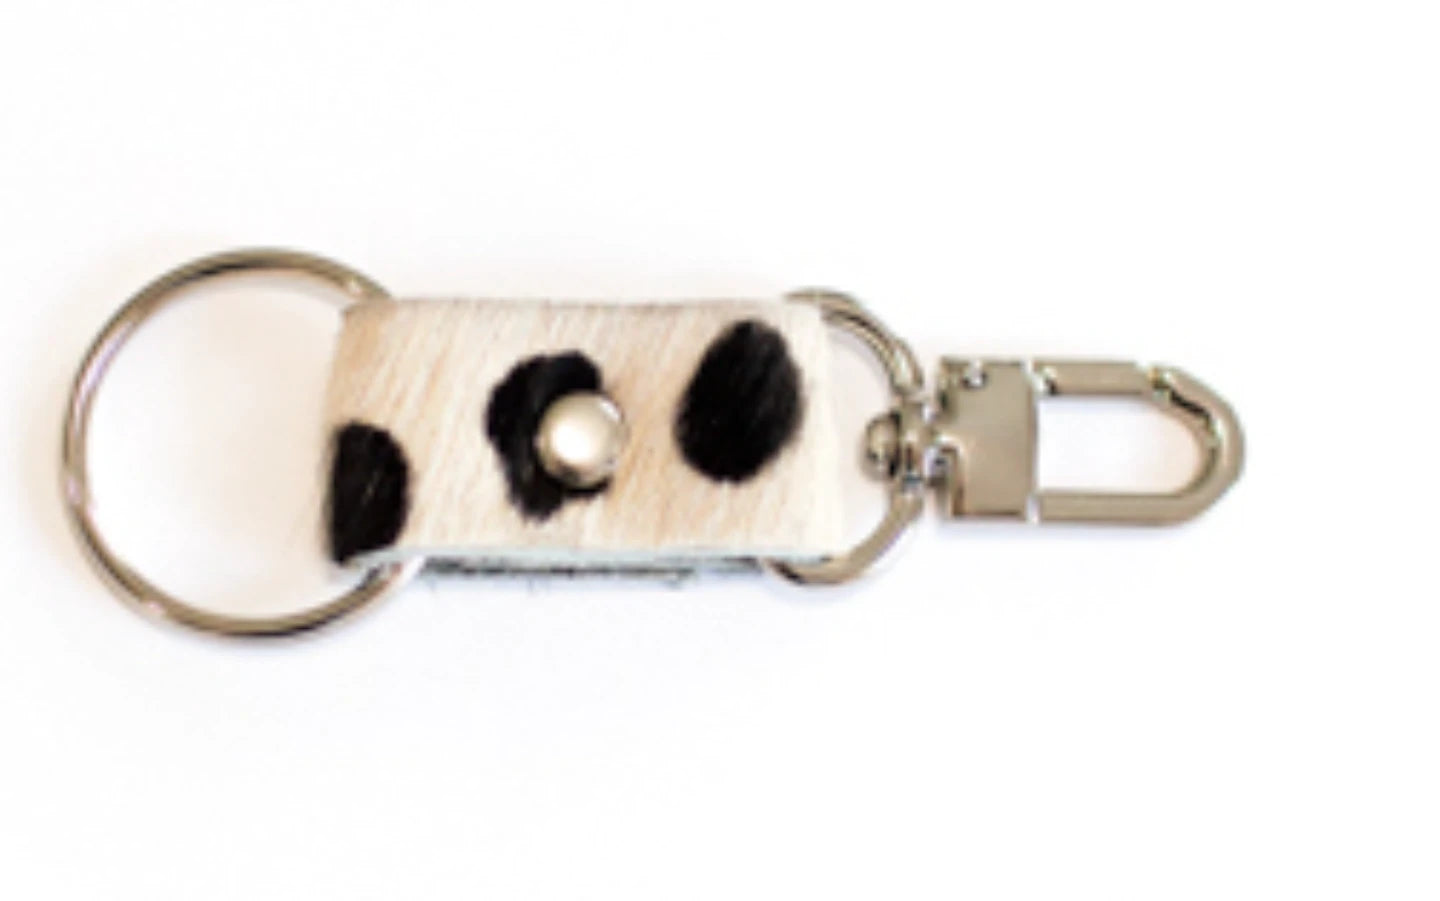 Key Chain - Cowhide & Leather